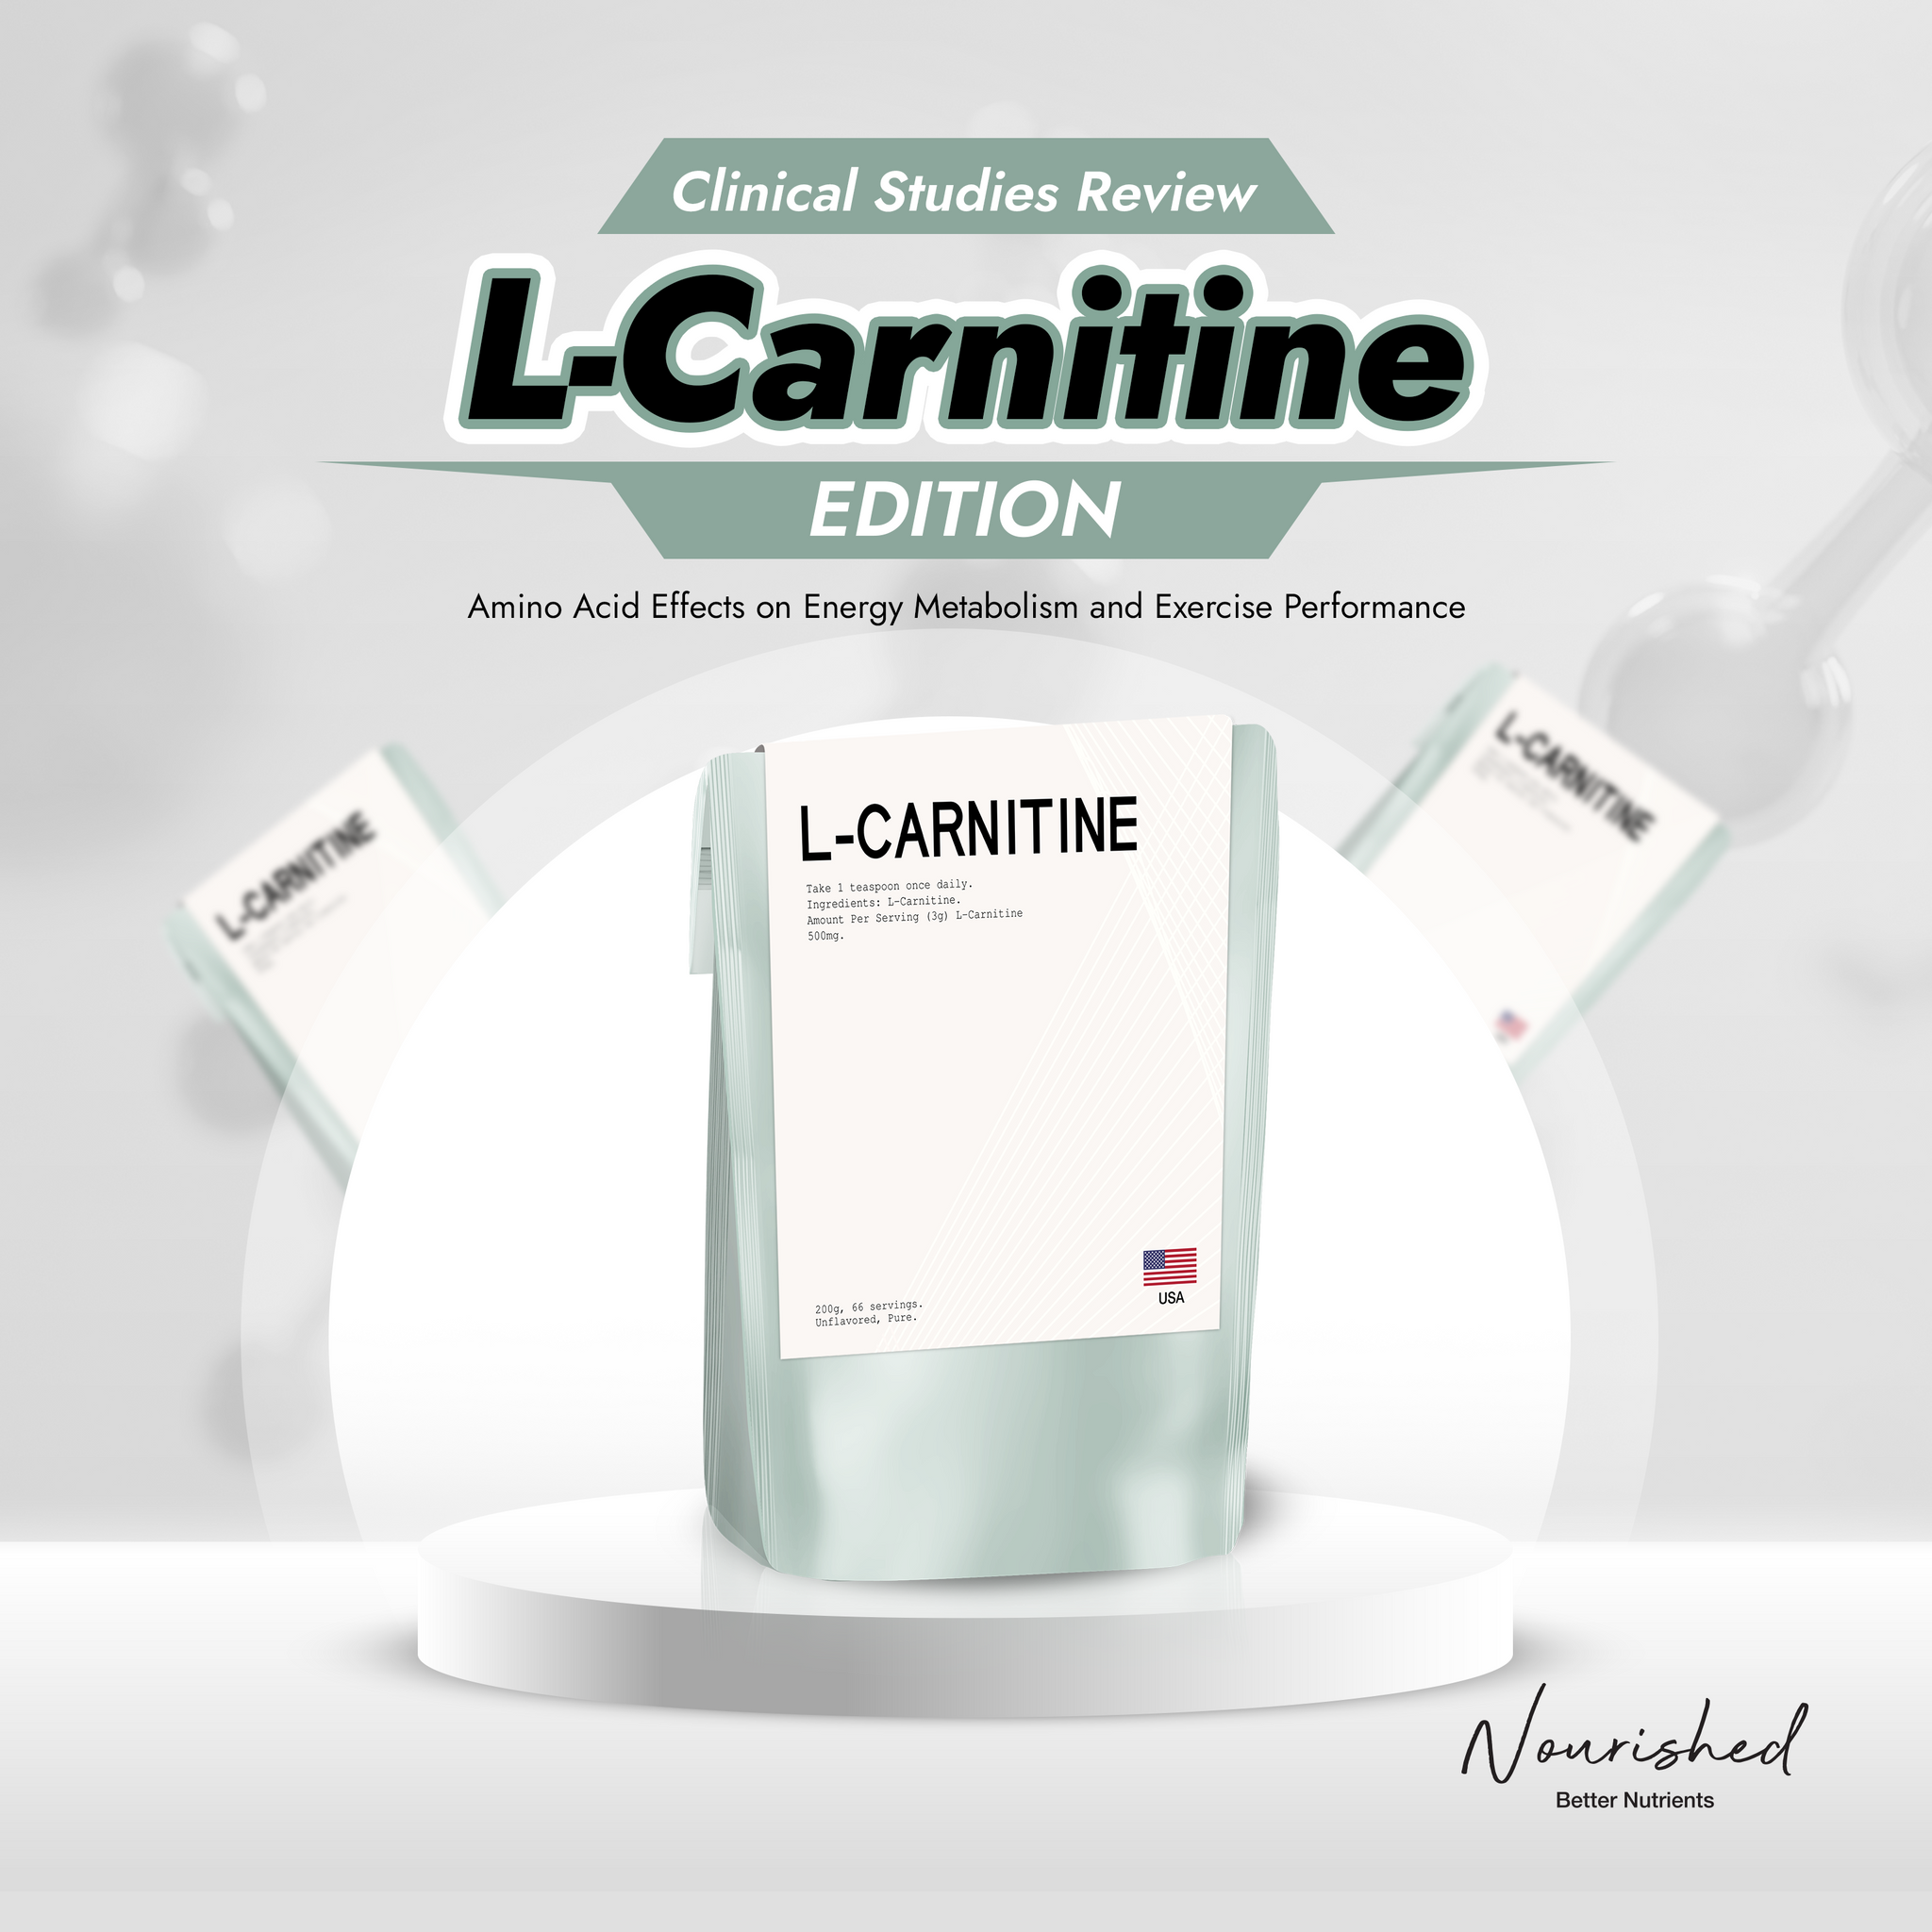 L-Carnitine: Discussing its Therapeutic Effects on Energy Metabolism and Exercise Performance